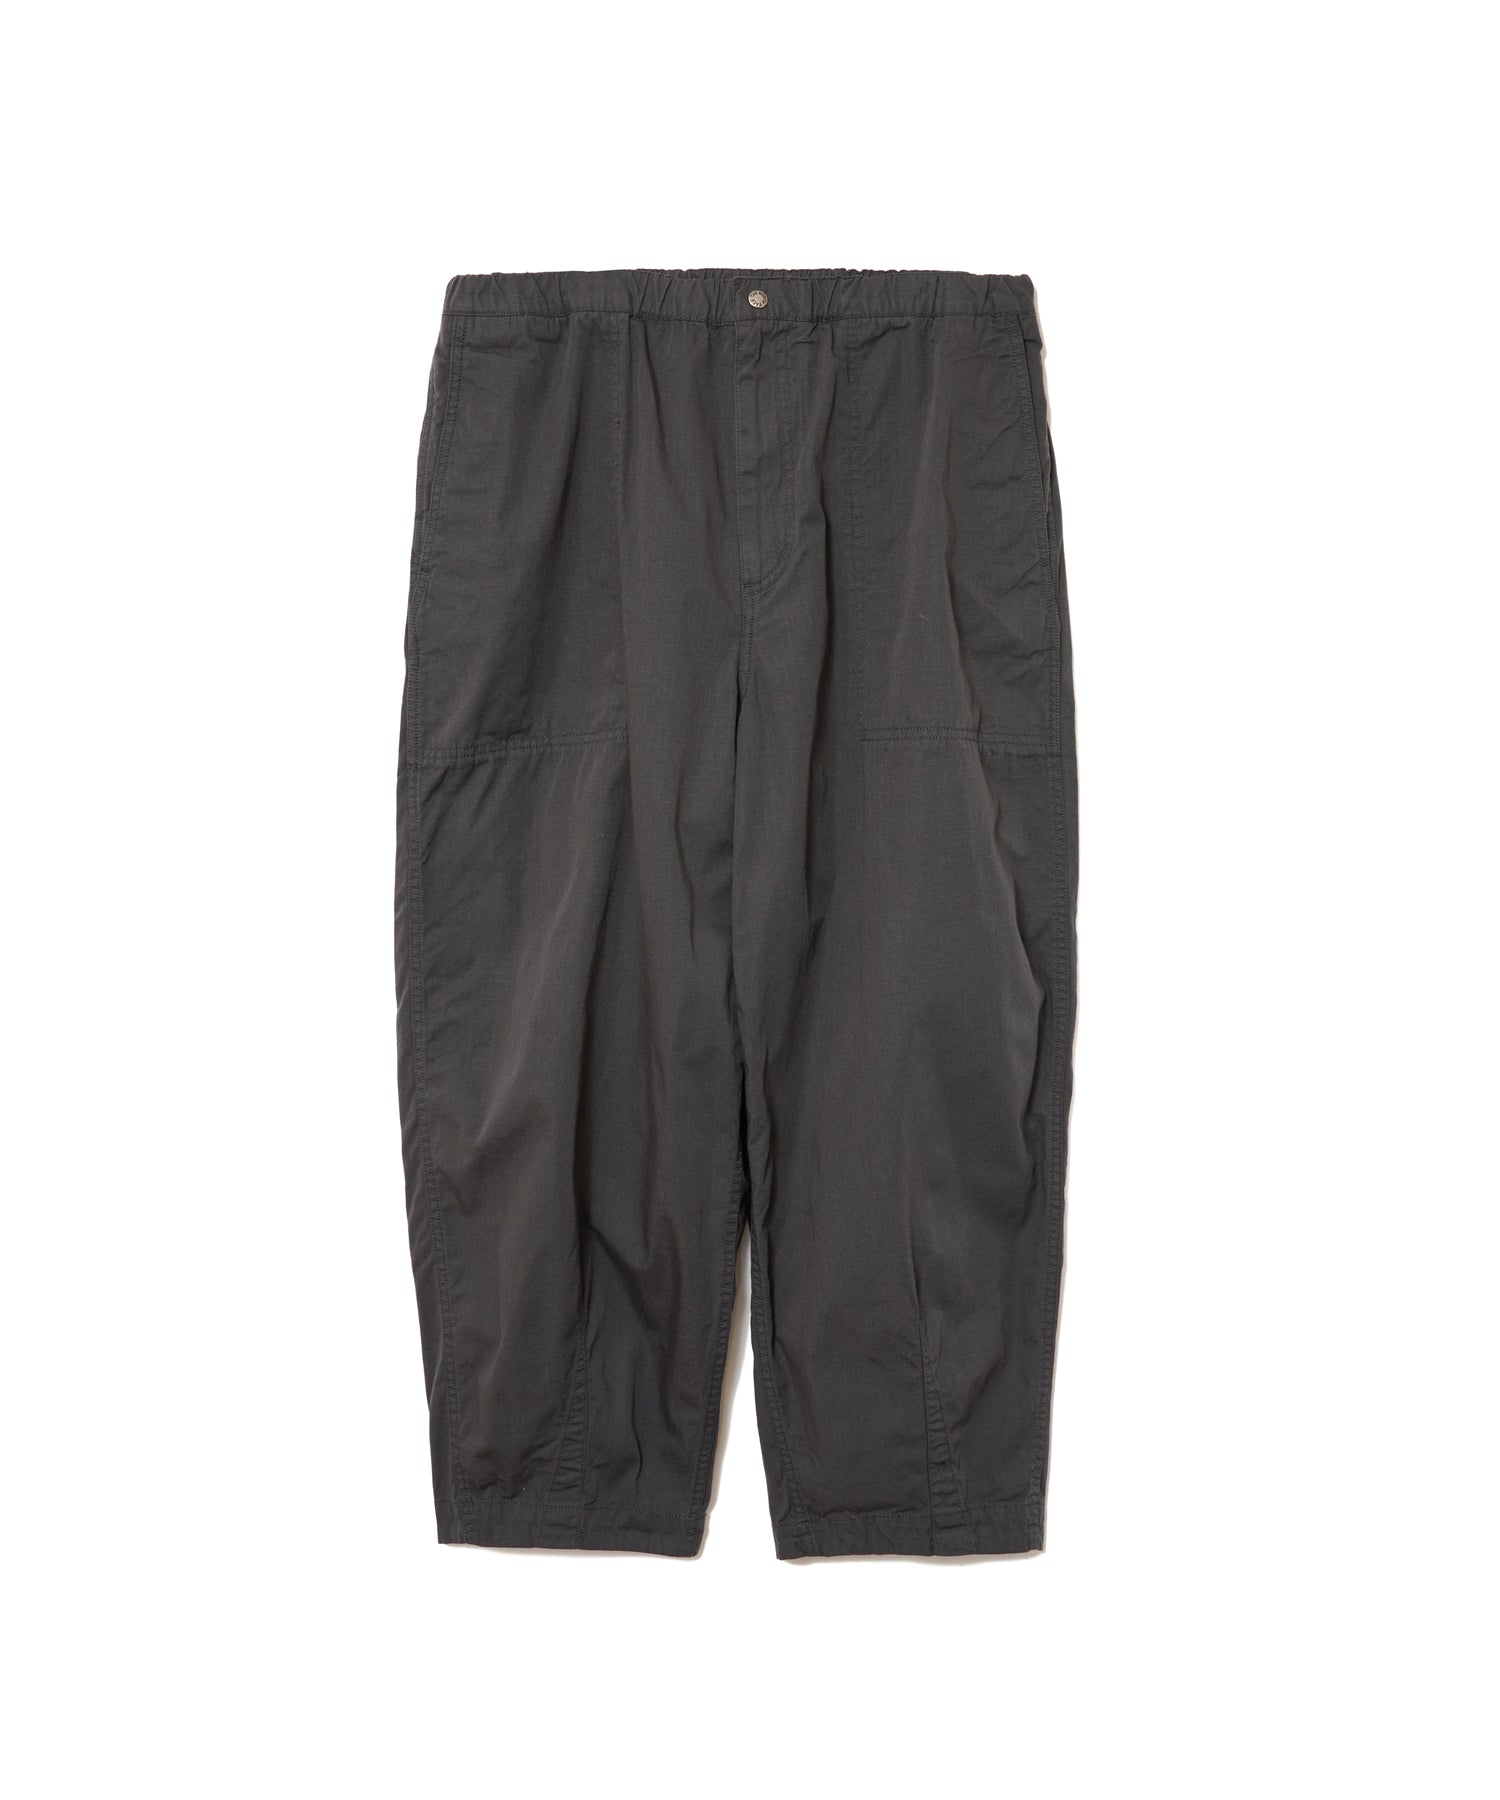 MEN】THE NORTH FACE PURPLE LABEL Ripstop Wide Cropped Field Pants 